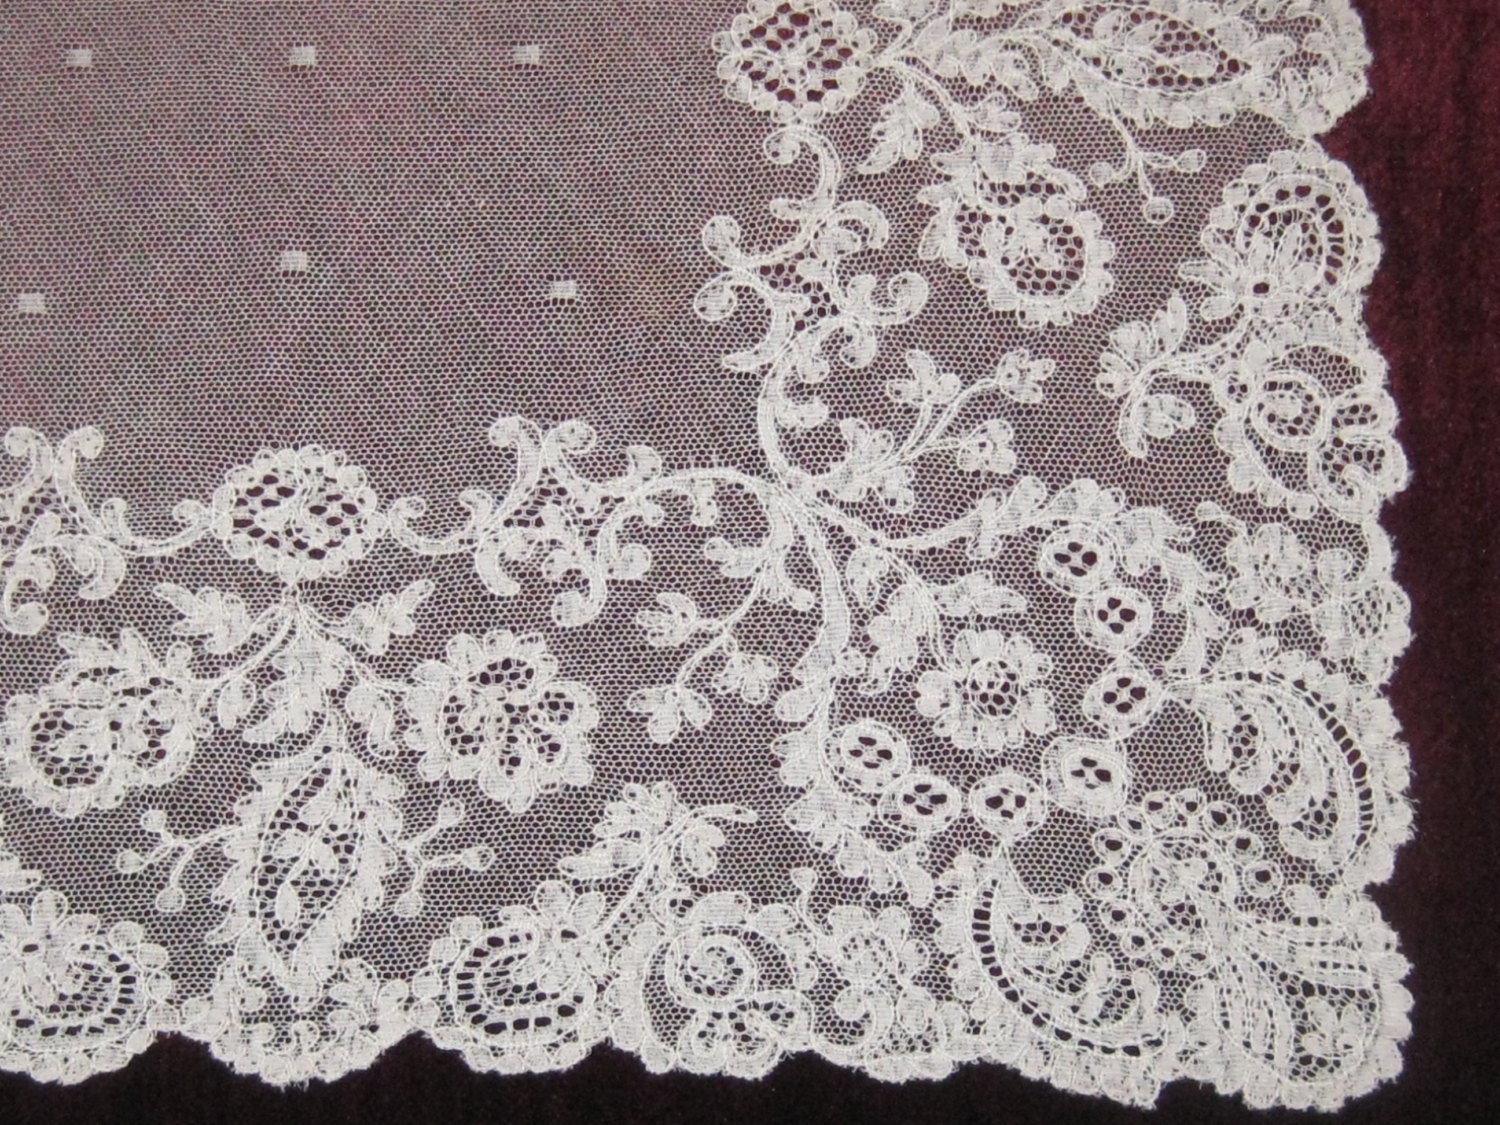 Antique / Vintage Lace Wedding Handkerchief Embroidery on